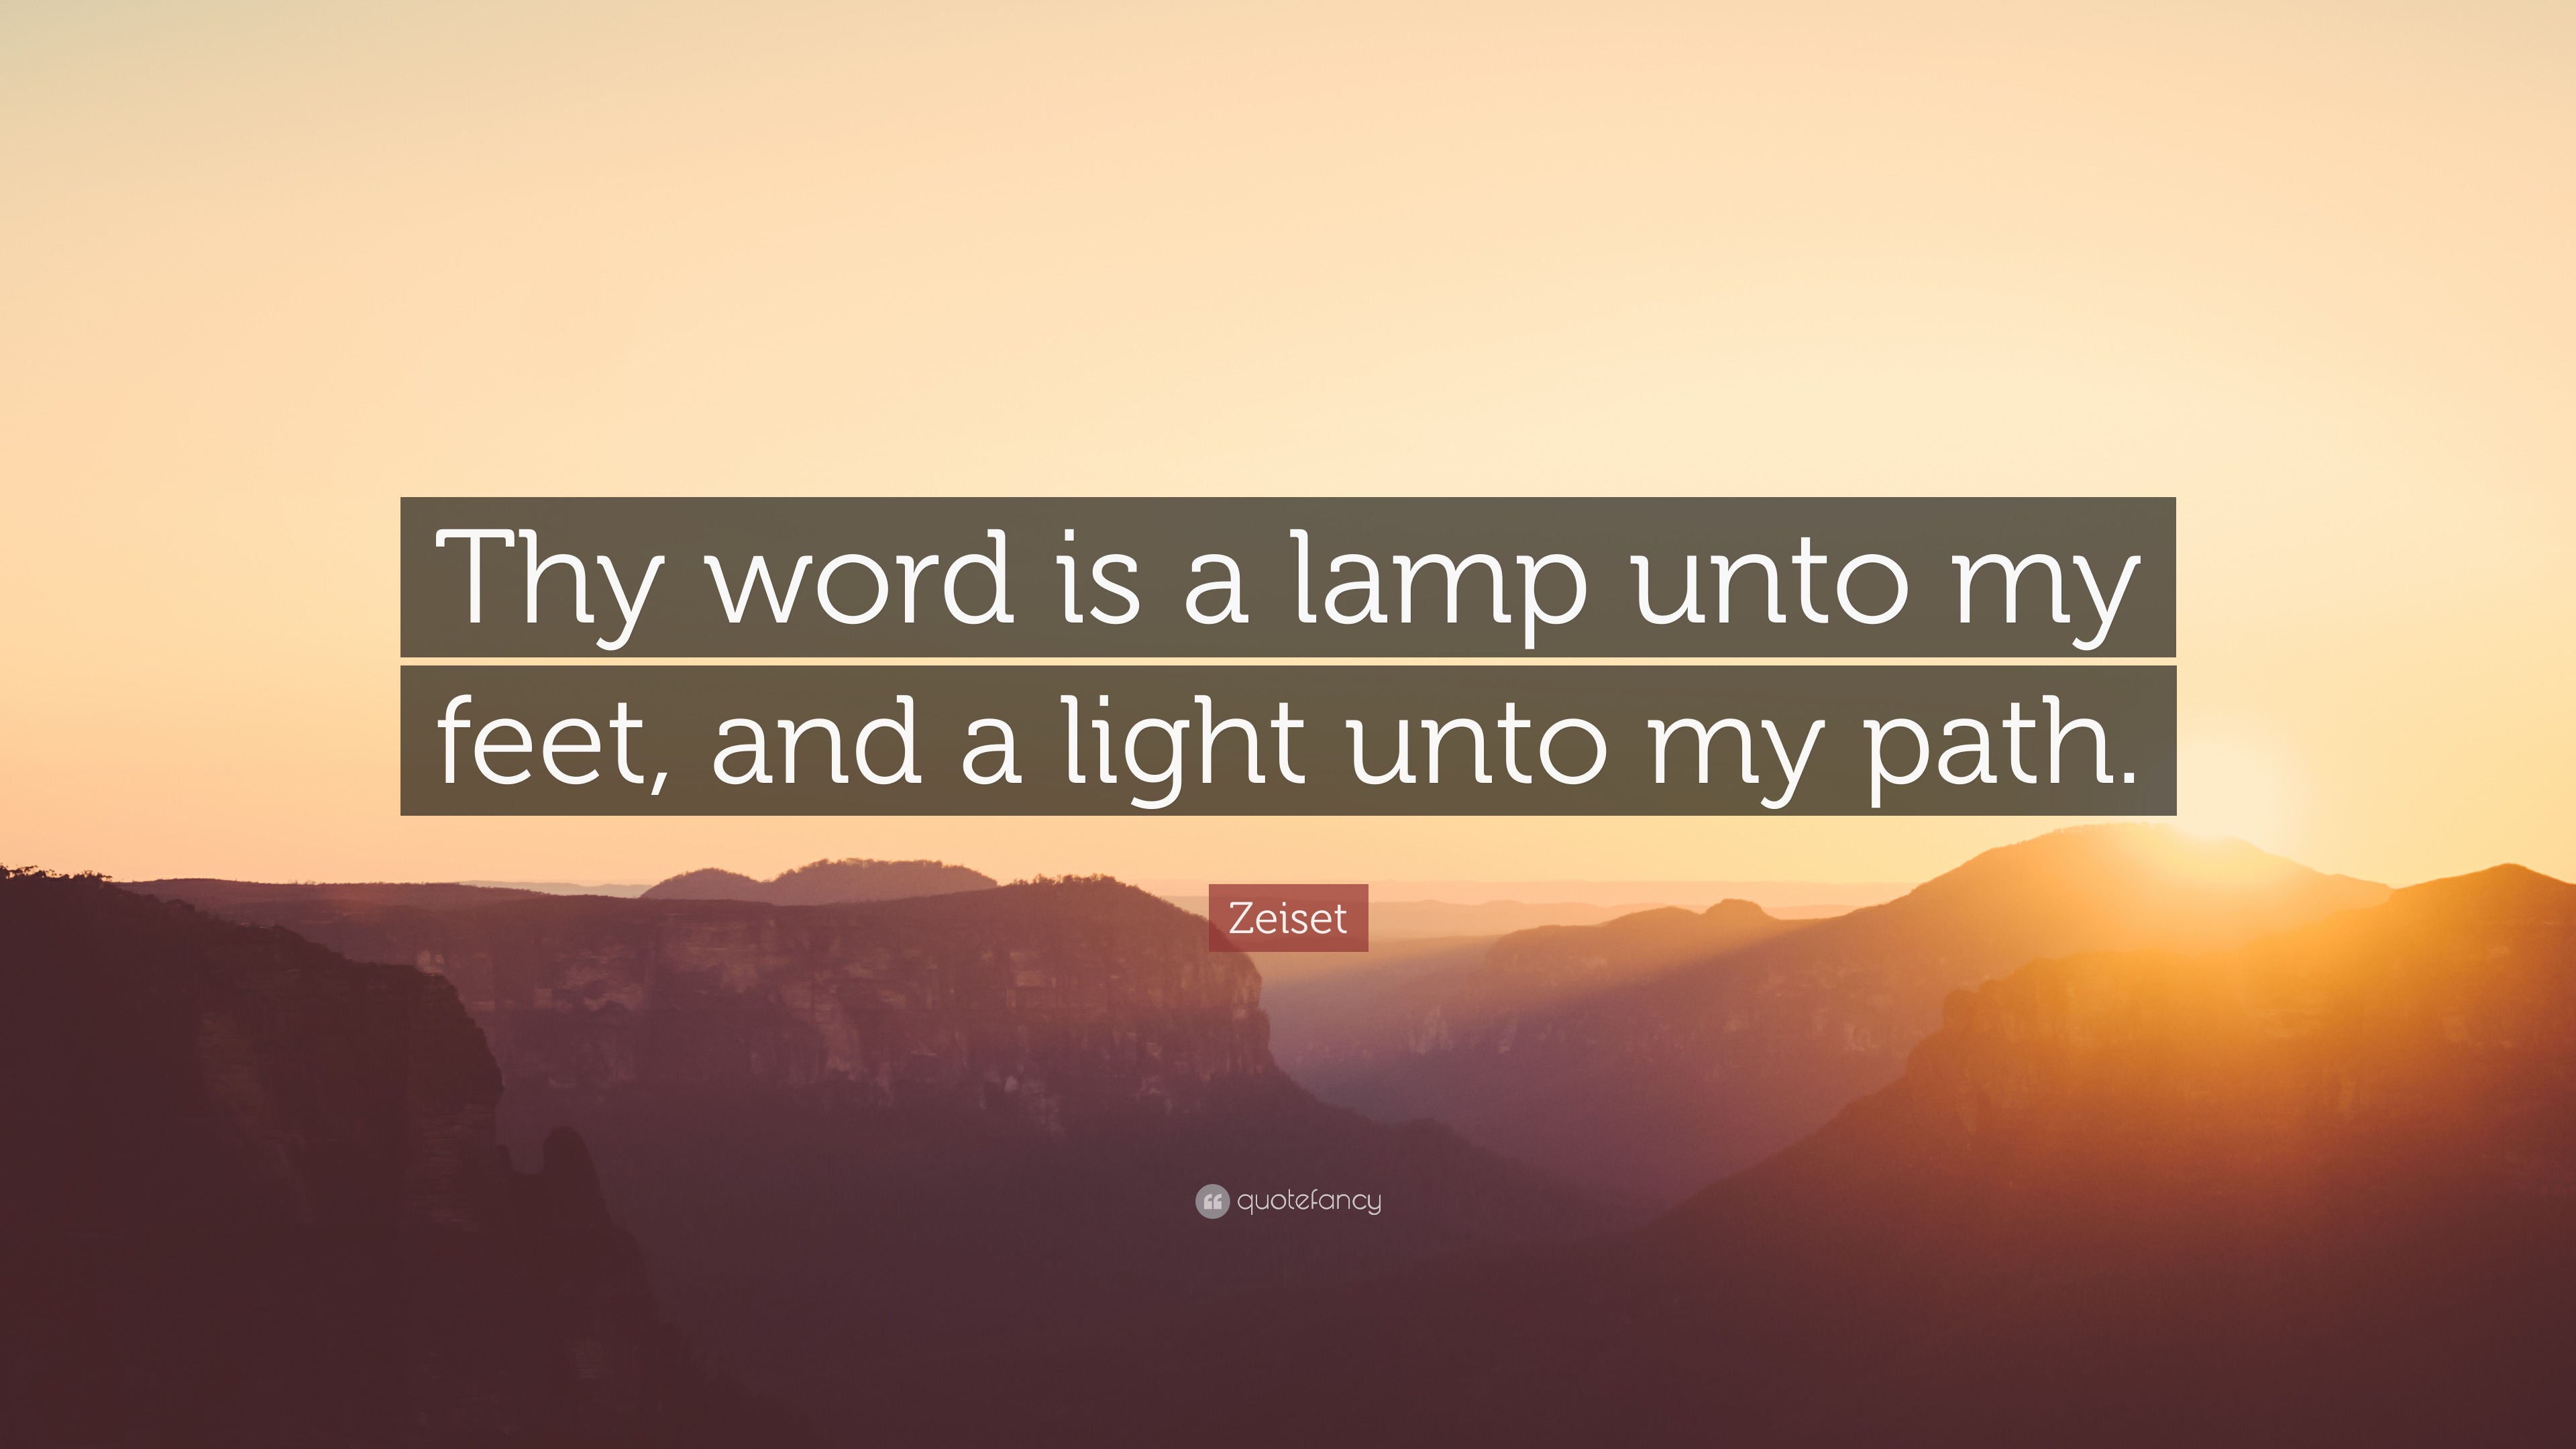 zeiset-quote-thy-word-is-a-lamp-unto-my-feet-and-a-light-unto-my-path